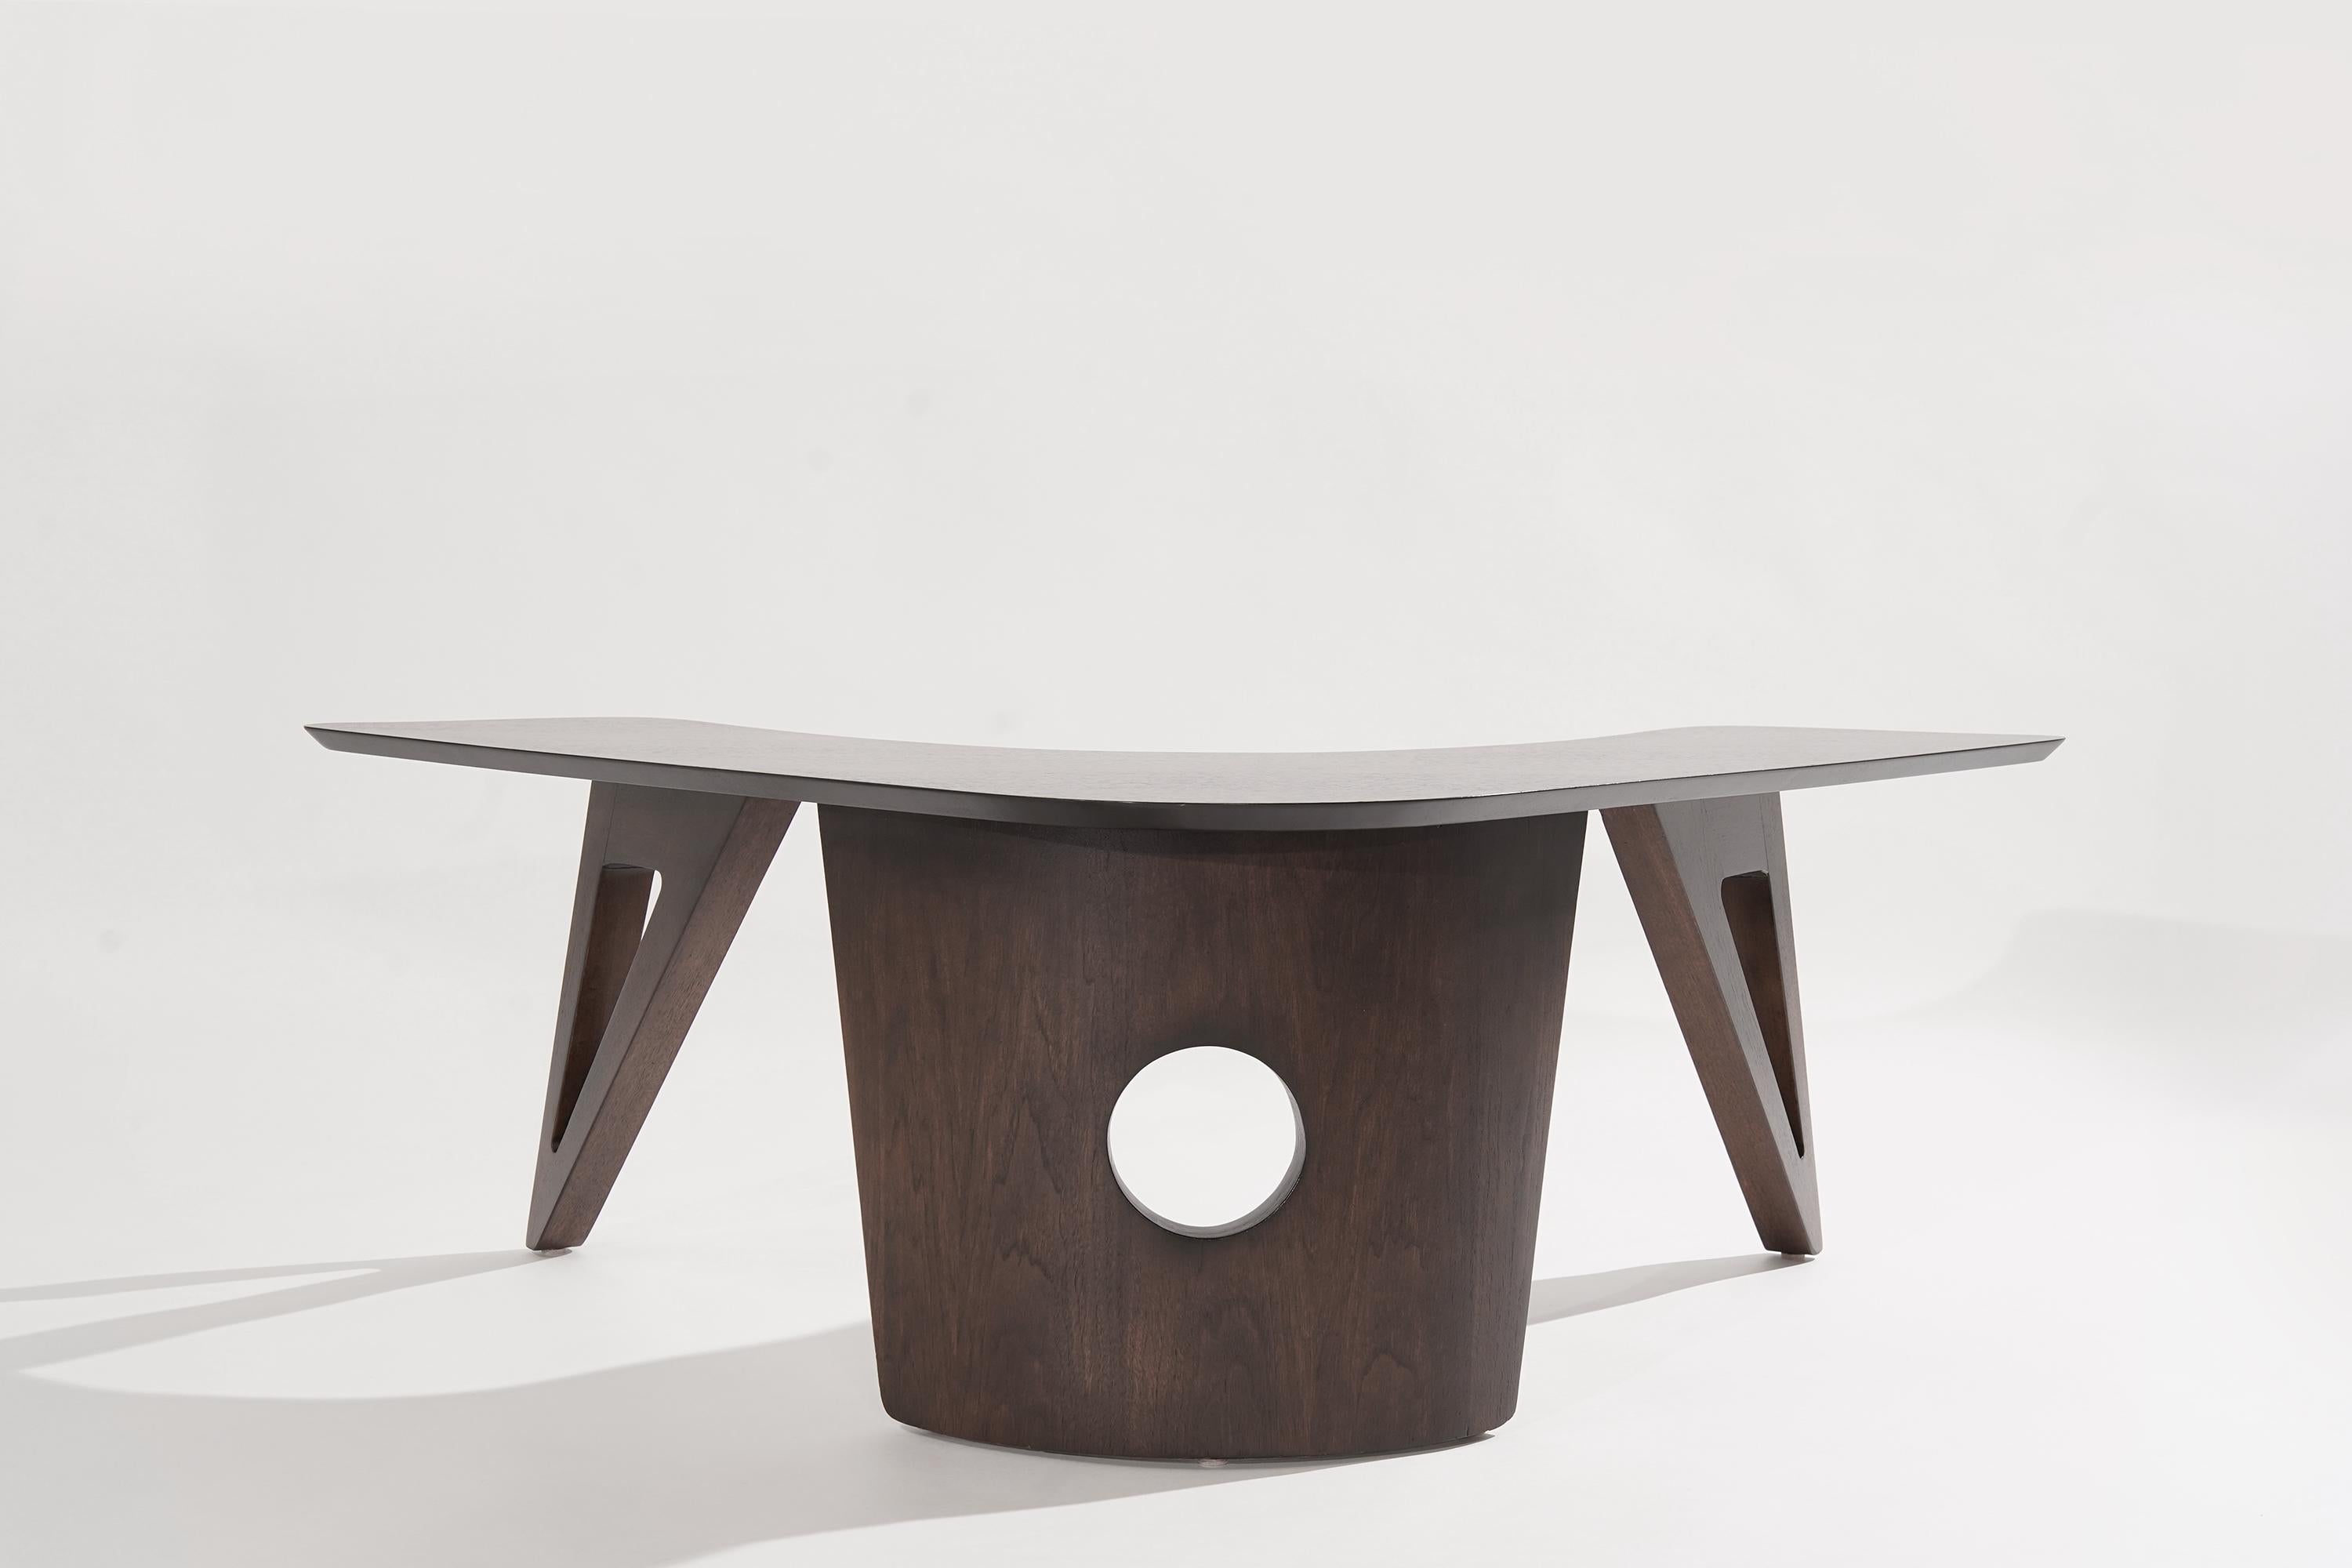 Walnut coffee table featuring a boomerang-shaped top, circa 1950-1959. Fully restored to its original espresso finish. Talk about a conversation piece!

Other designers from this period include Adrian Pearsall, Vladimir Kagan, Hans Wegner, Gio